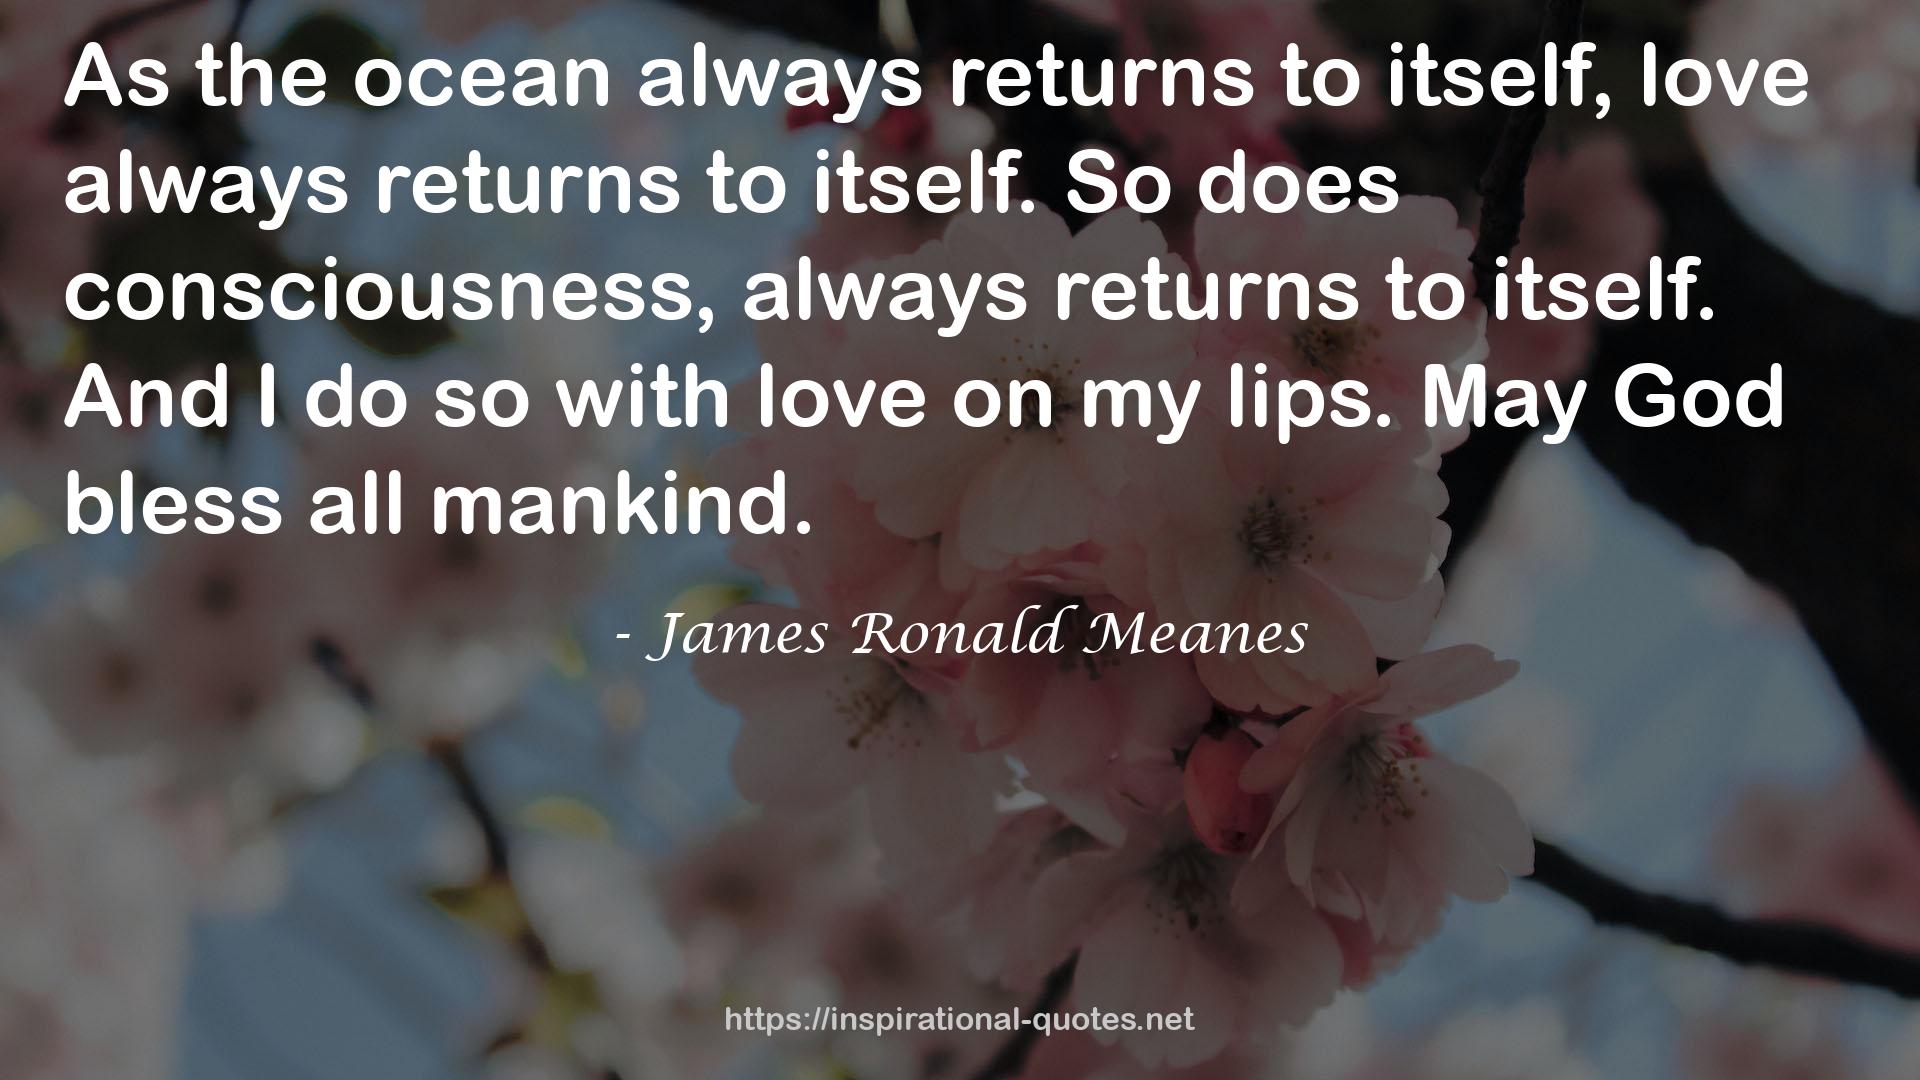 James Ronald Meanes QUOTES